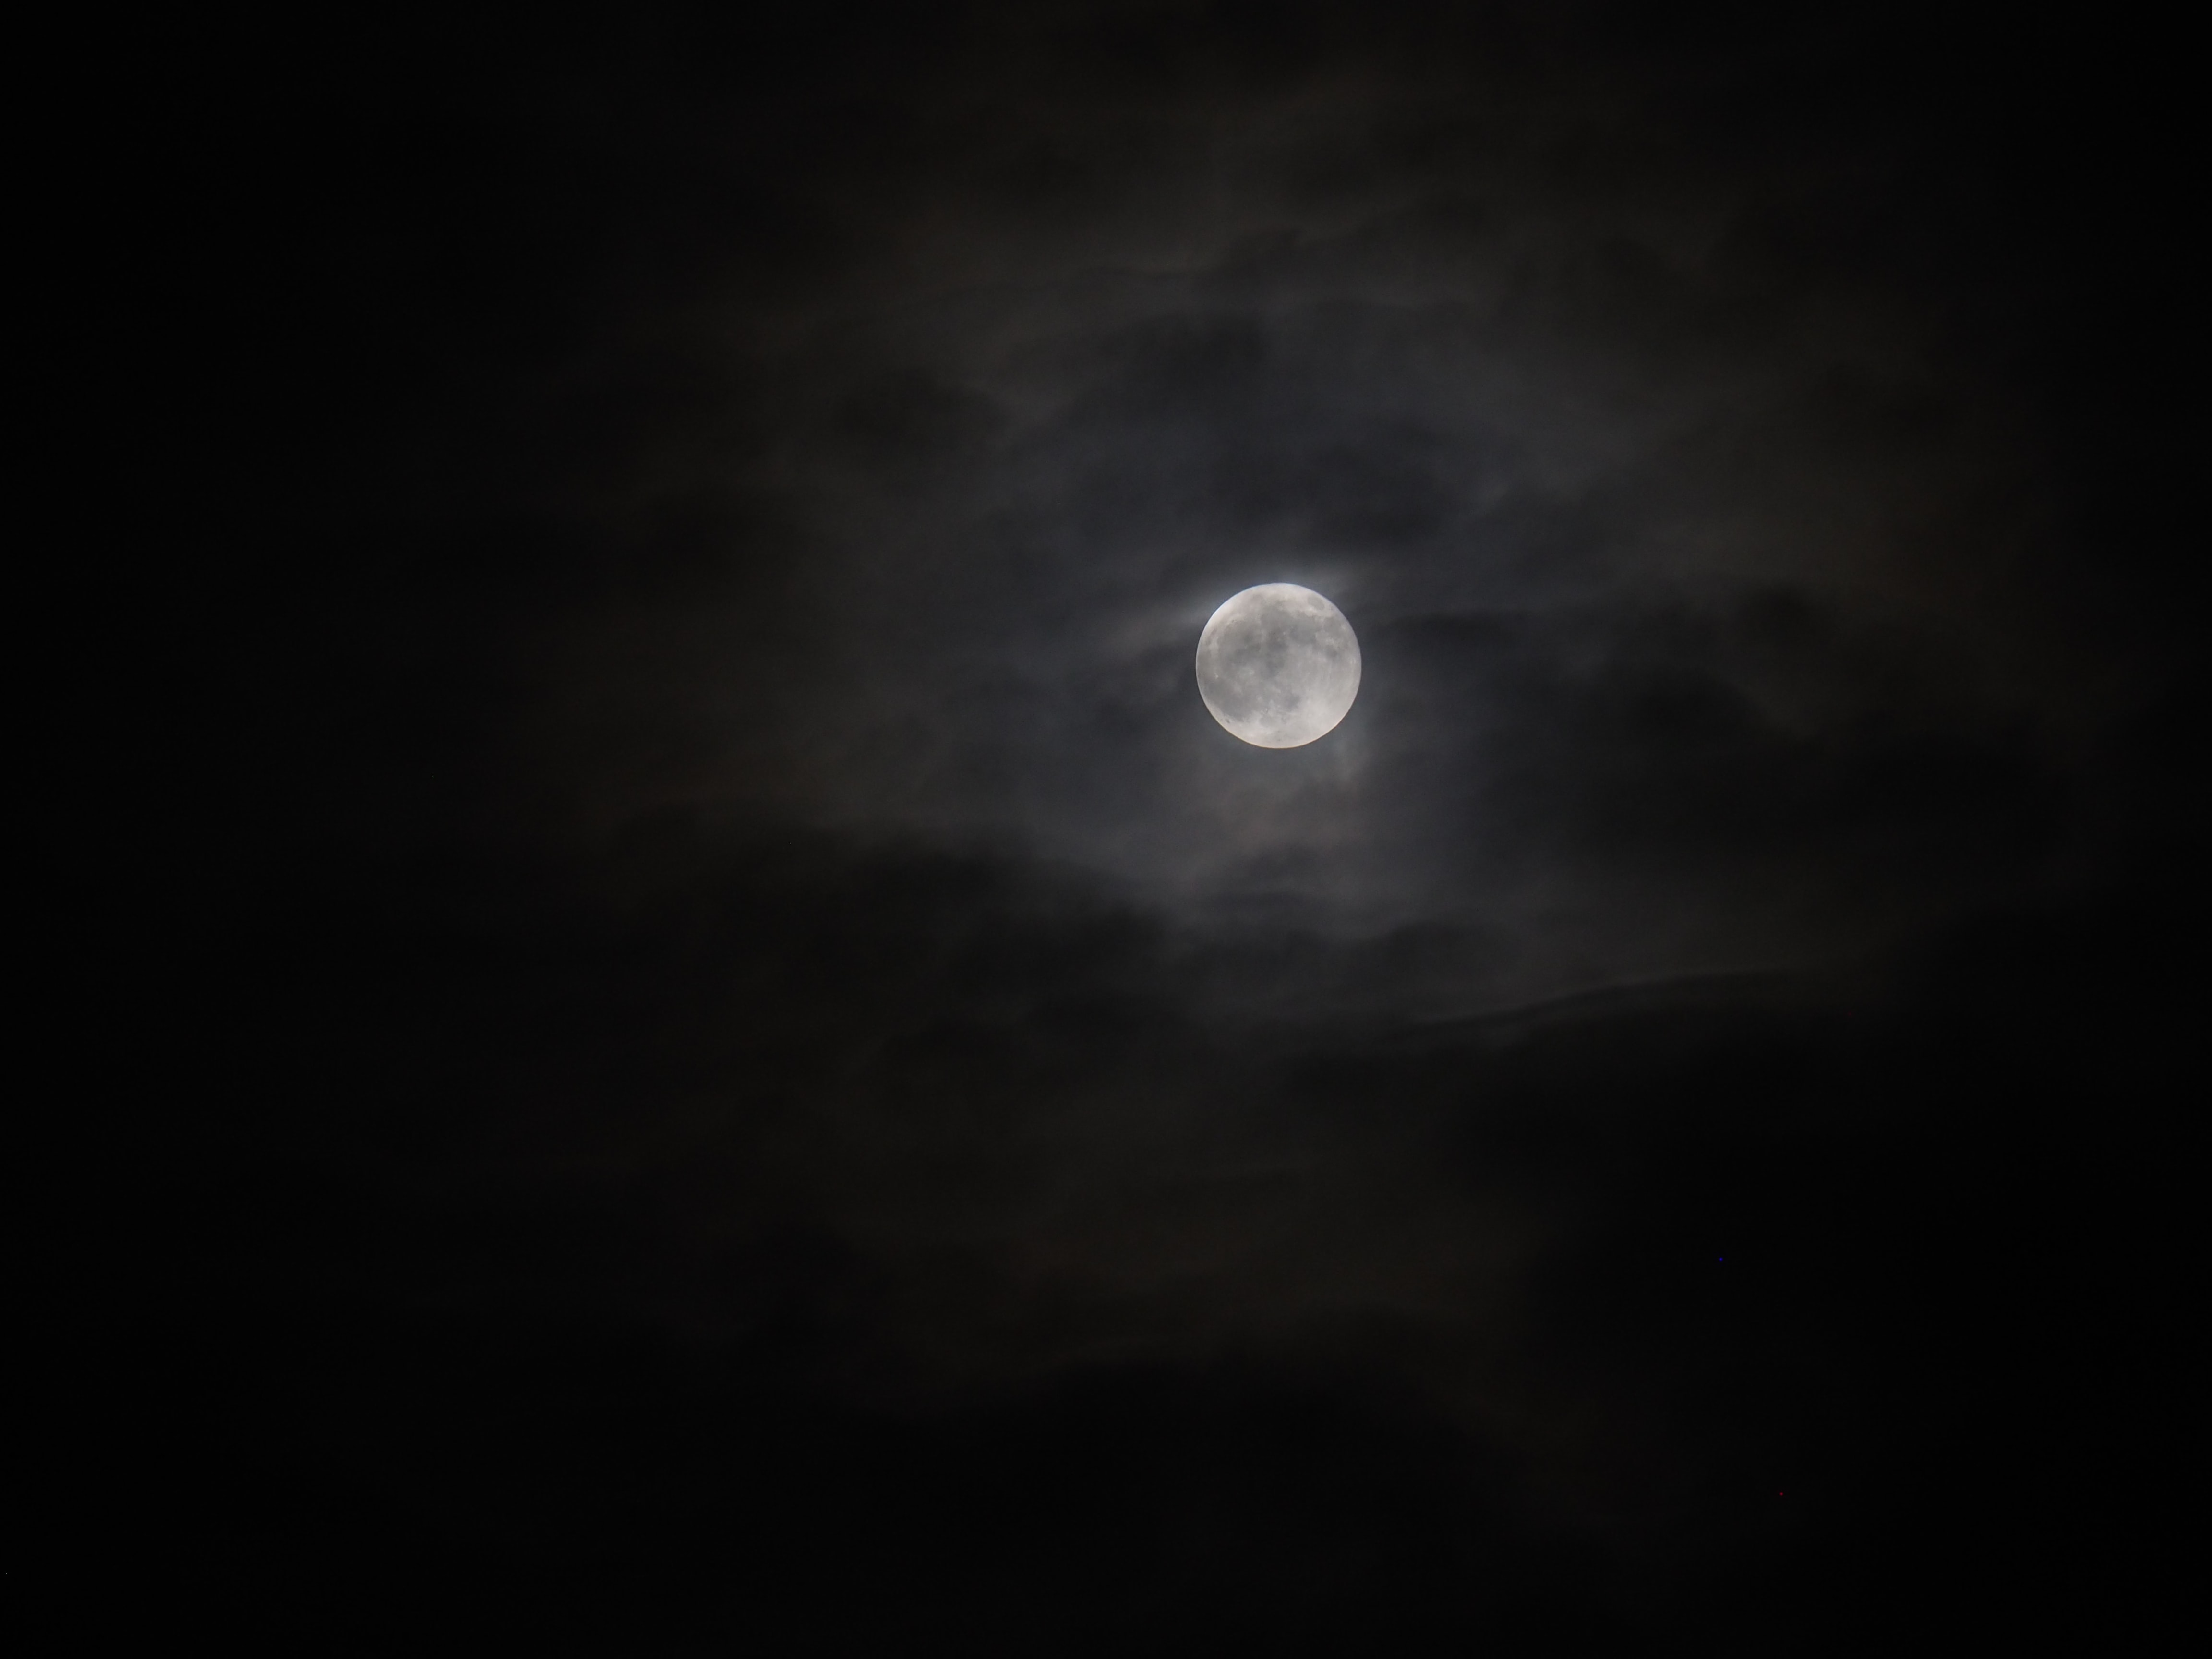 147896 download wallpaper moon, night, clouds, black, bw, chb, full moon screensavers and pictures for free